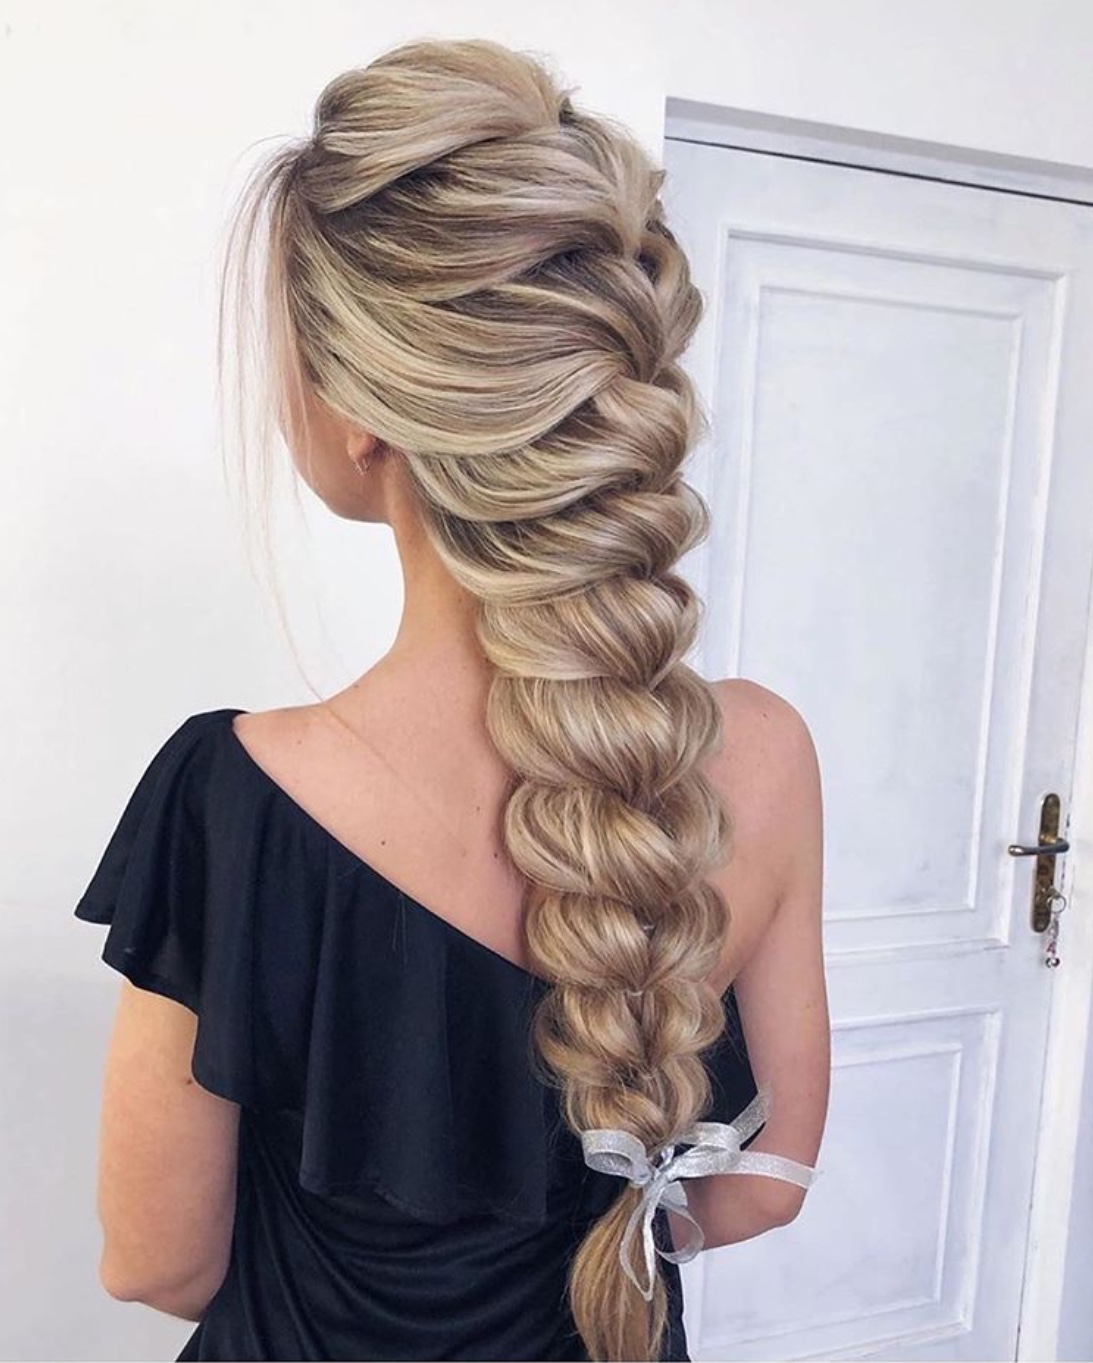 TRENDING HAIRCUTS 💇‍♀️😍 (@girls.haircuts) • Instagram photos and videos